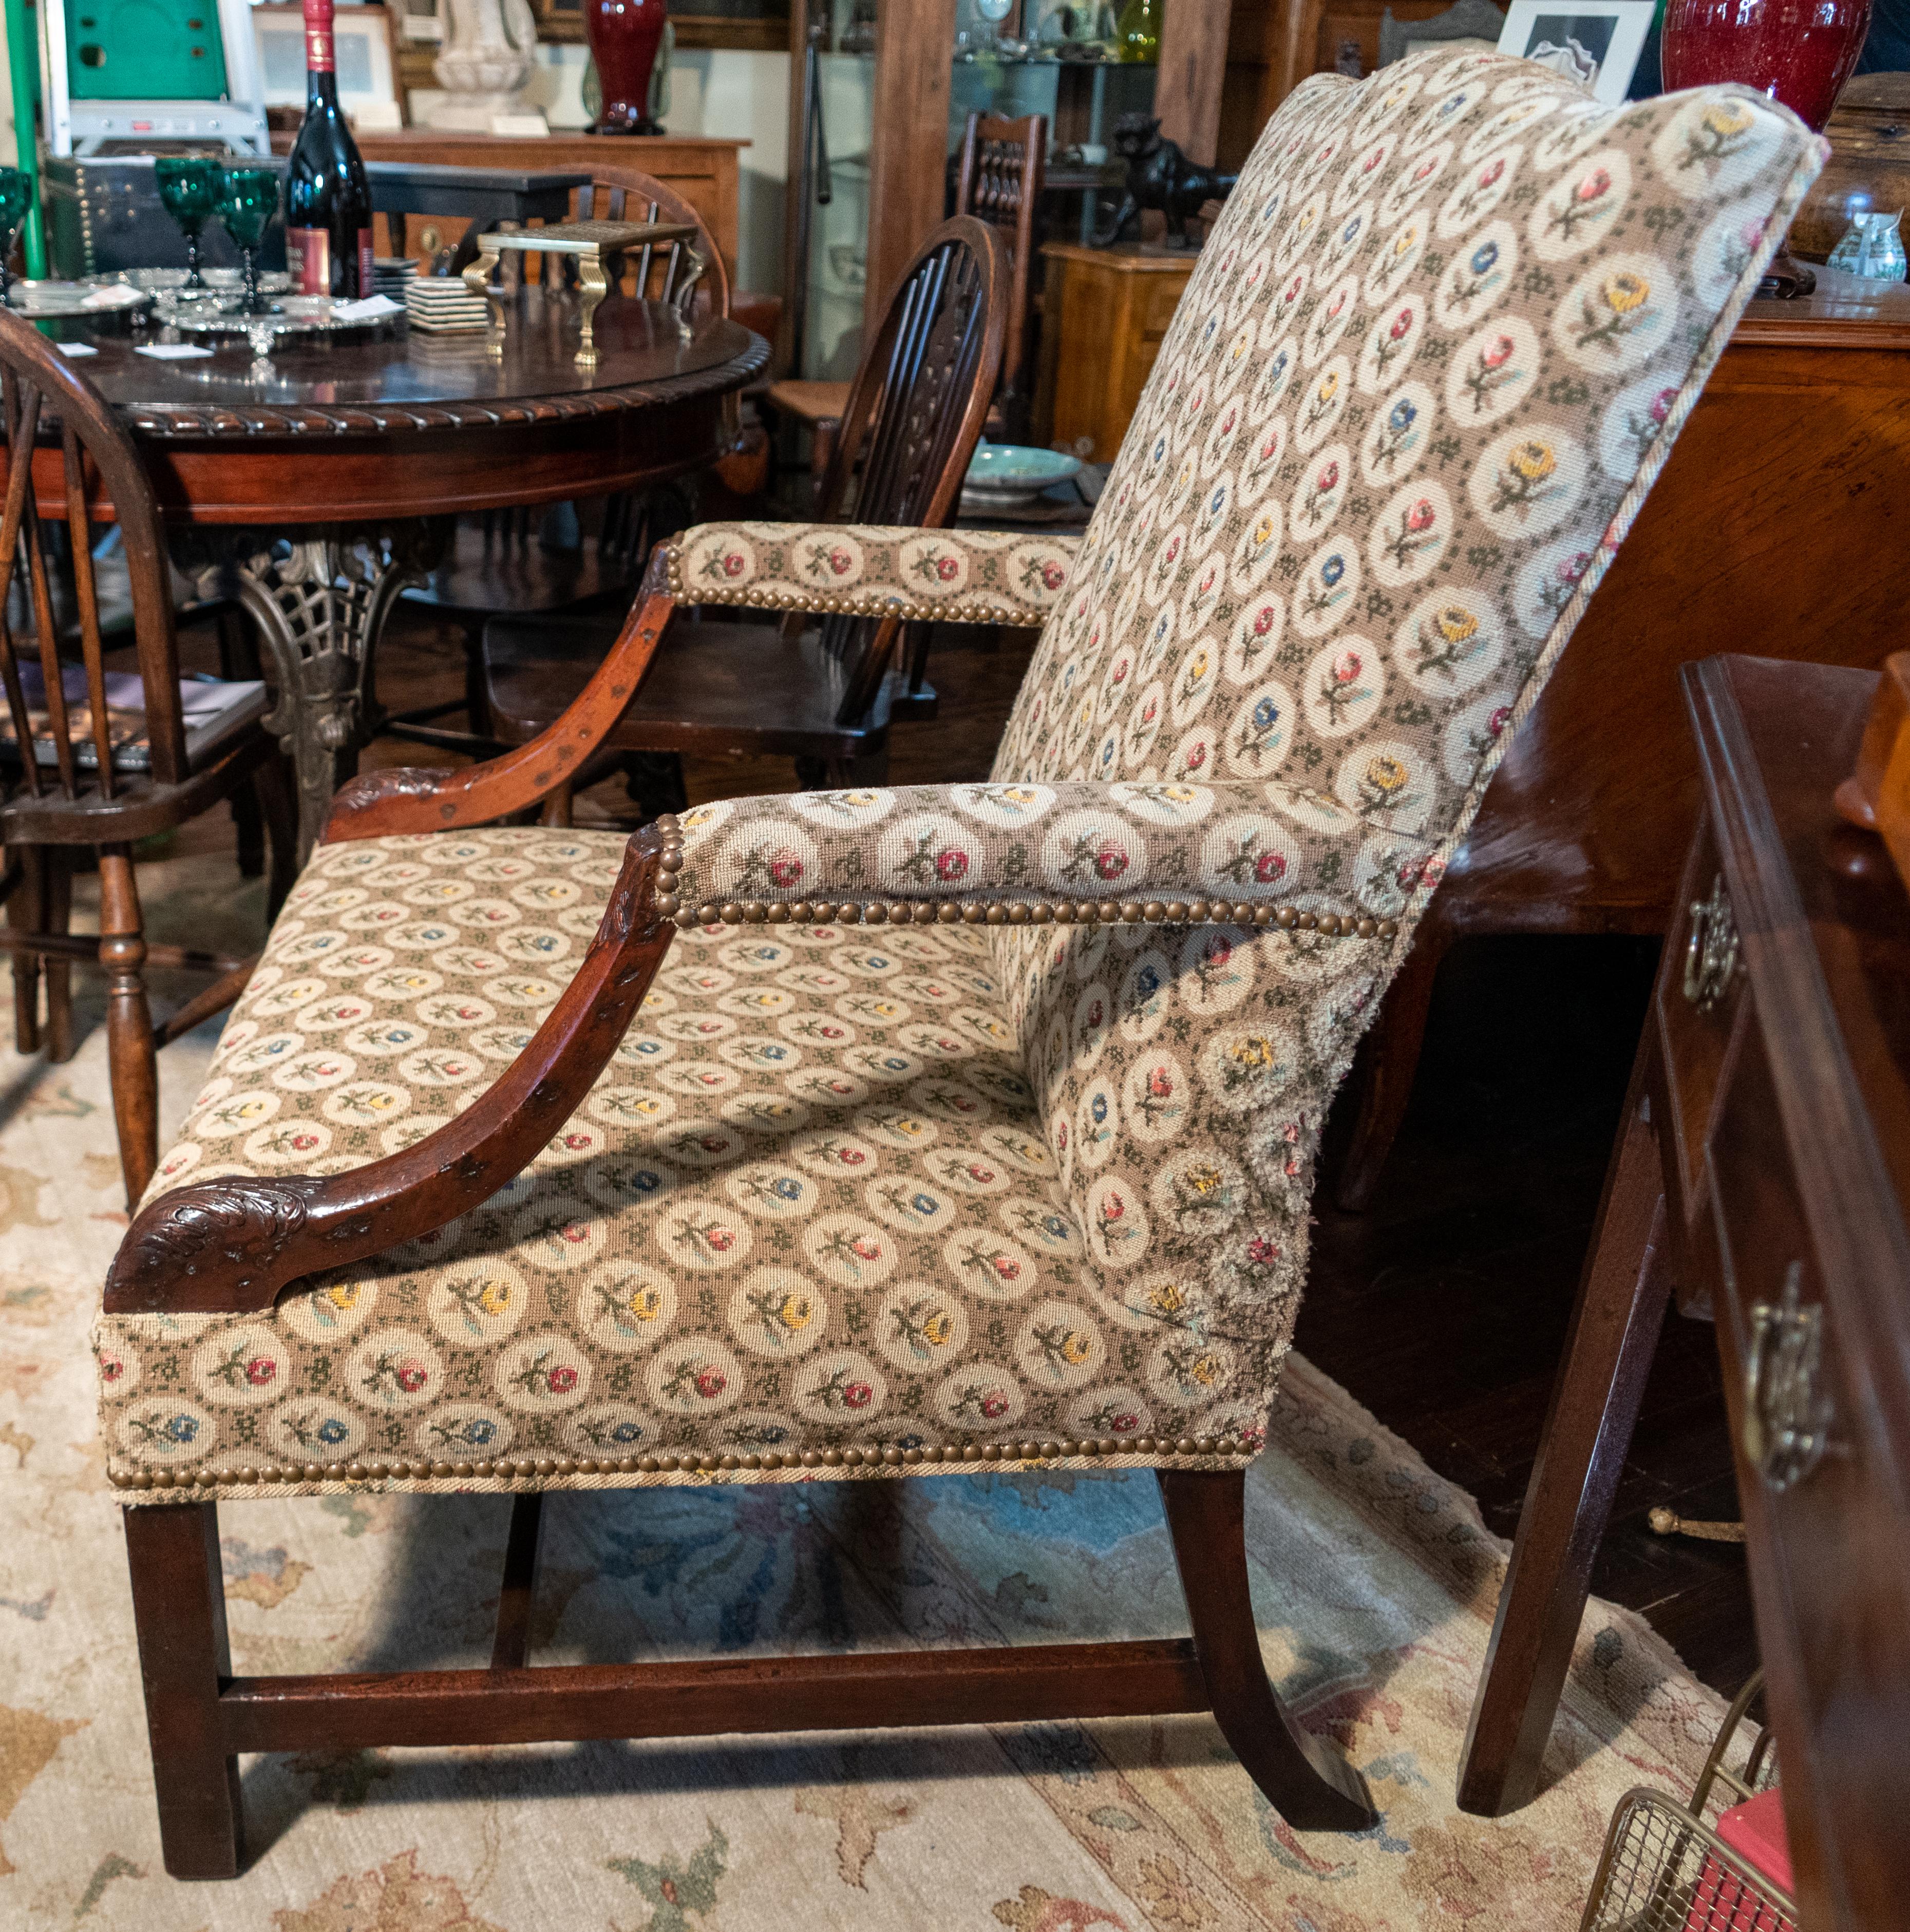 18th century English Gainsborough / reading chair, walnut, circa 1775
Well carved acanthus details on the arms.
Upholstered in old needlepoint. Tight upholstery, sits, firm.
Comfortable and large scale.